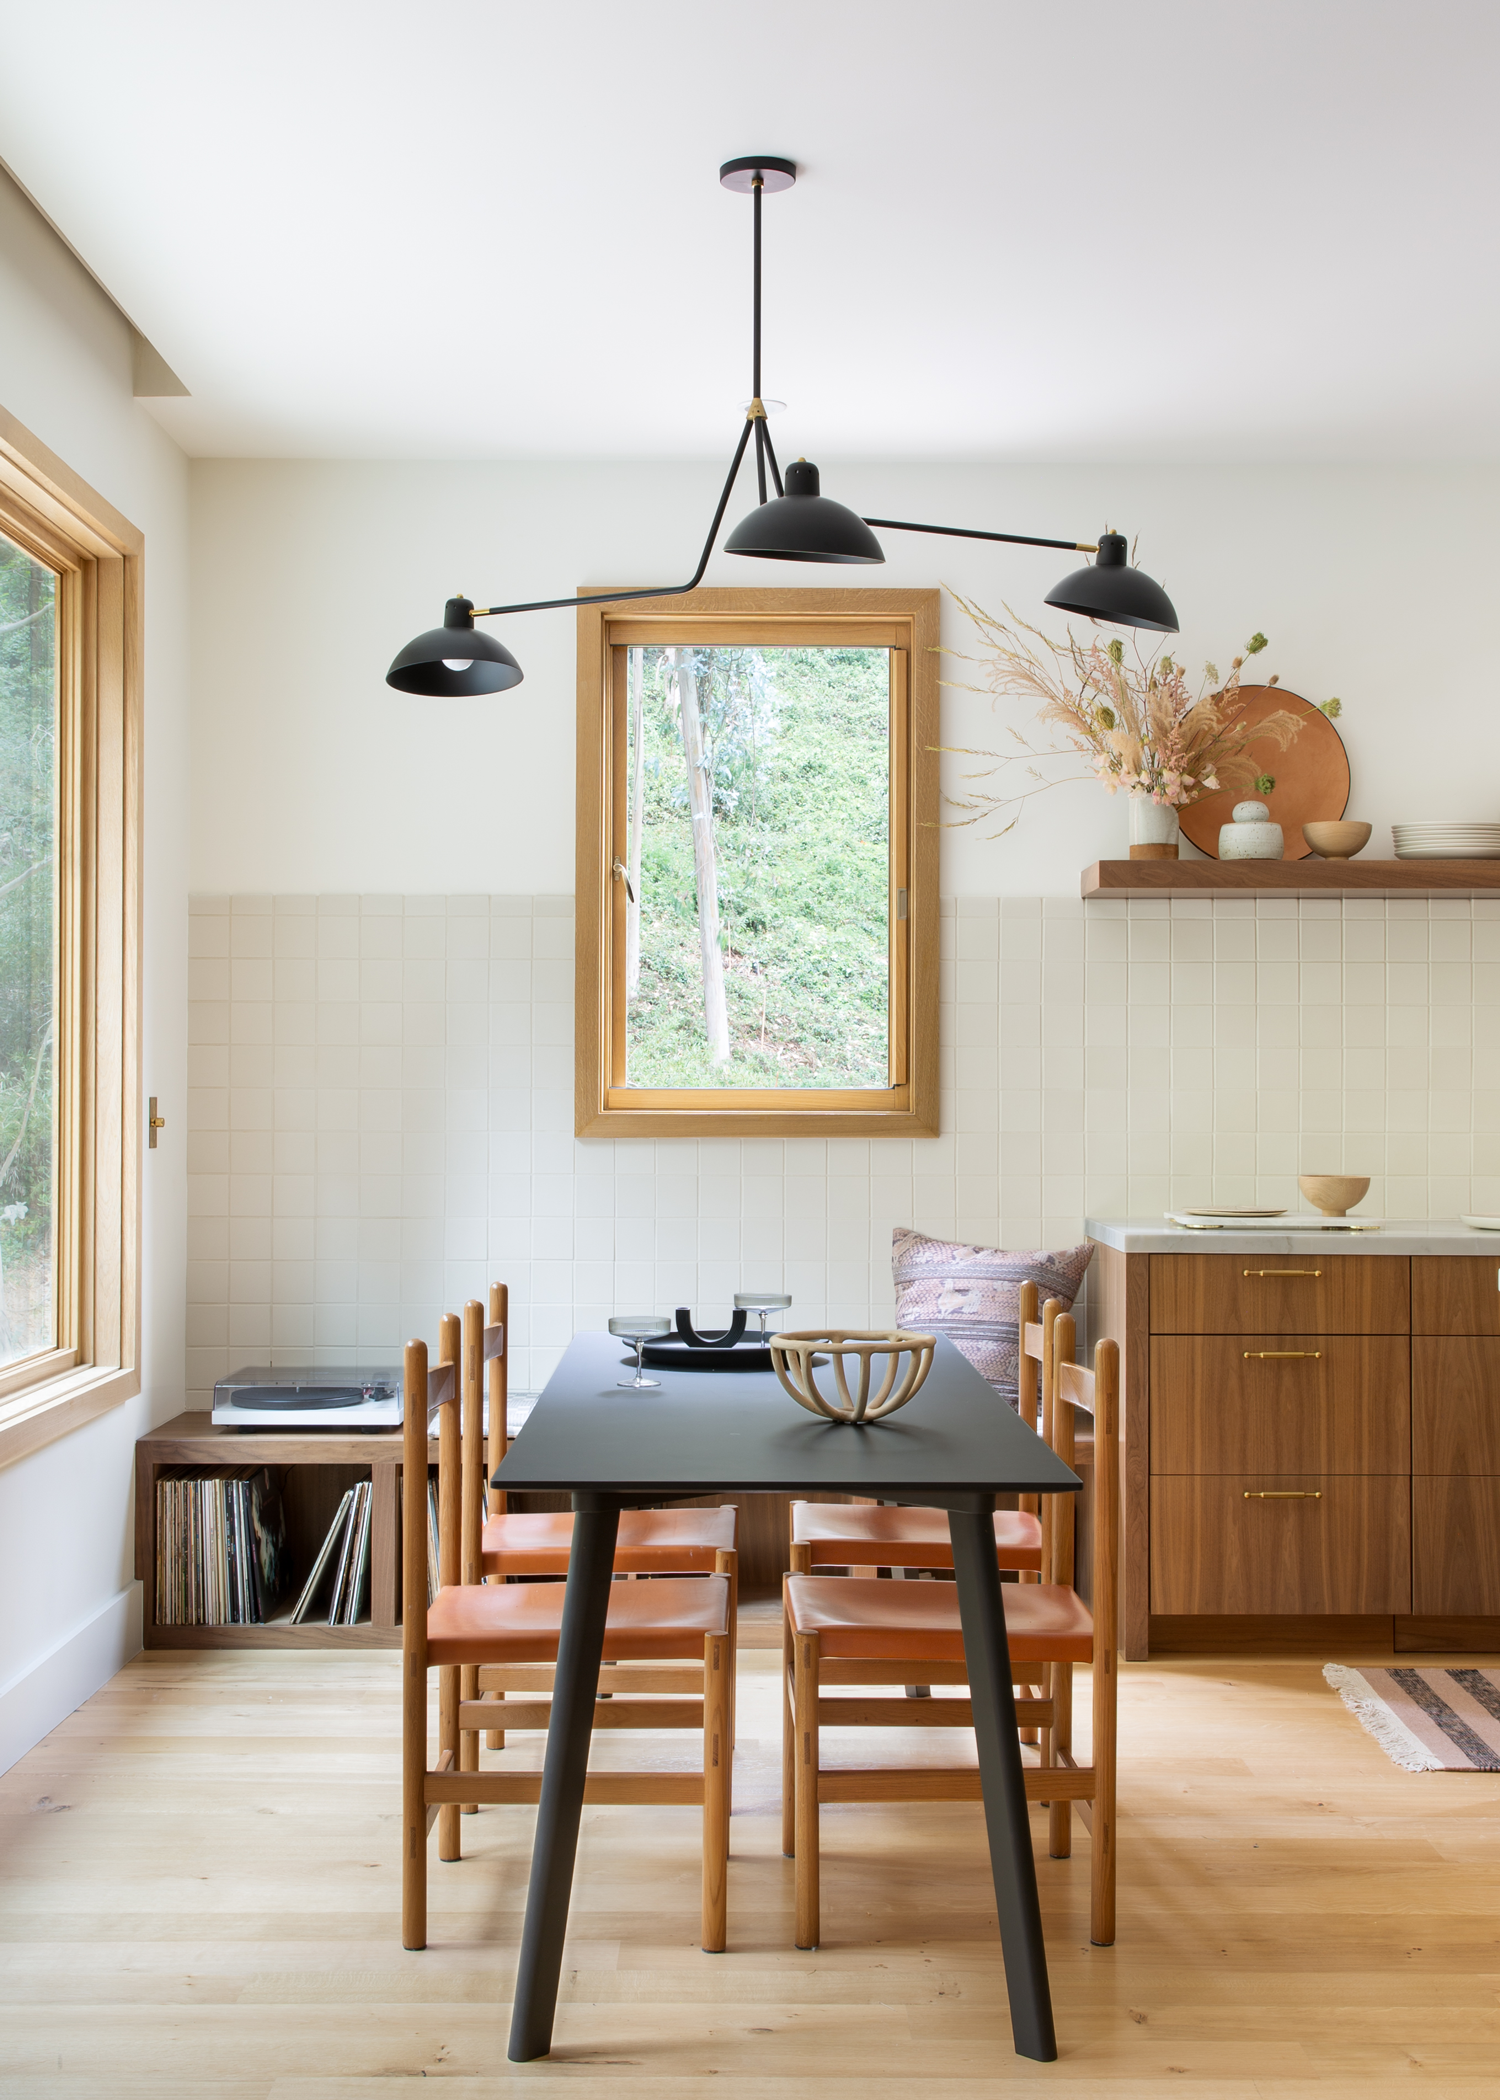 dining space with minimalist chairs, table and window